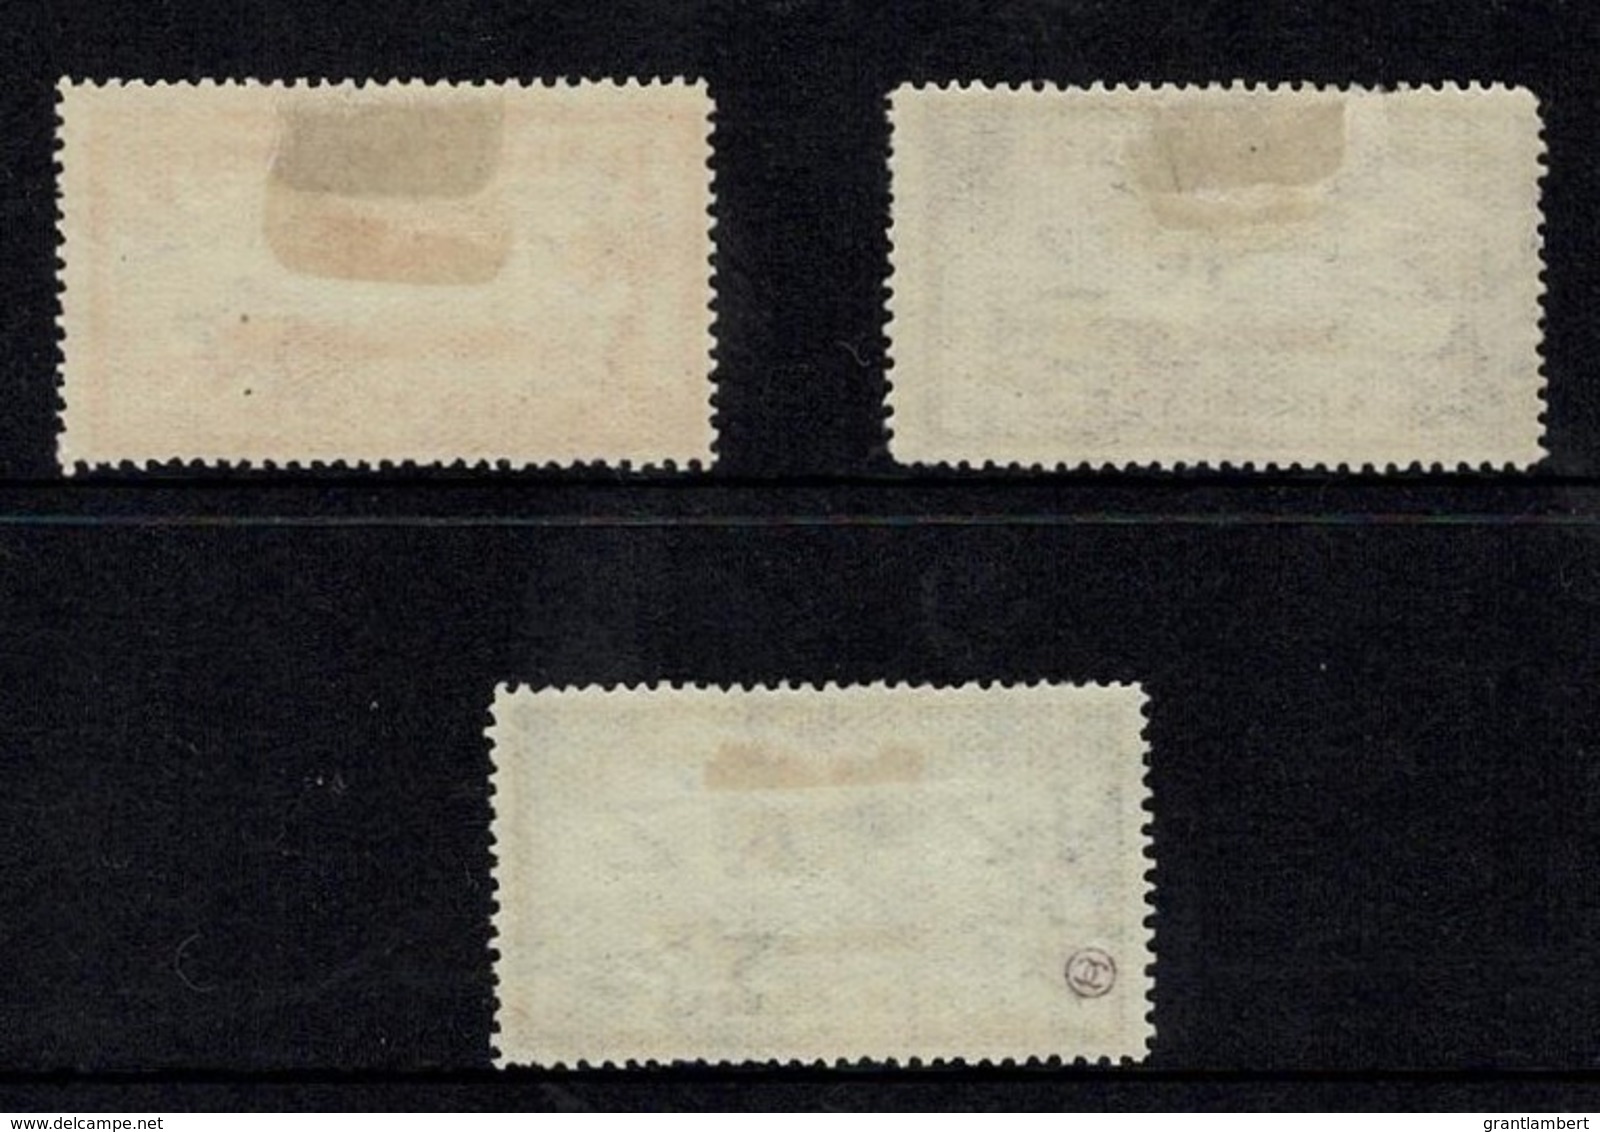 New Zealand 1935 Air Mail Set Of 3 MH - - - Neufs